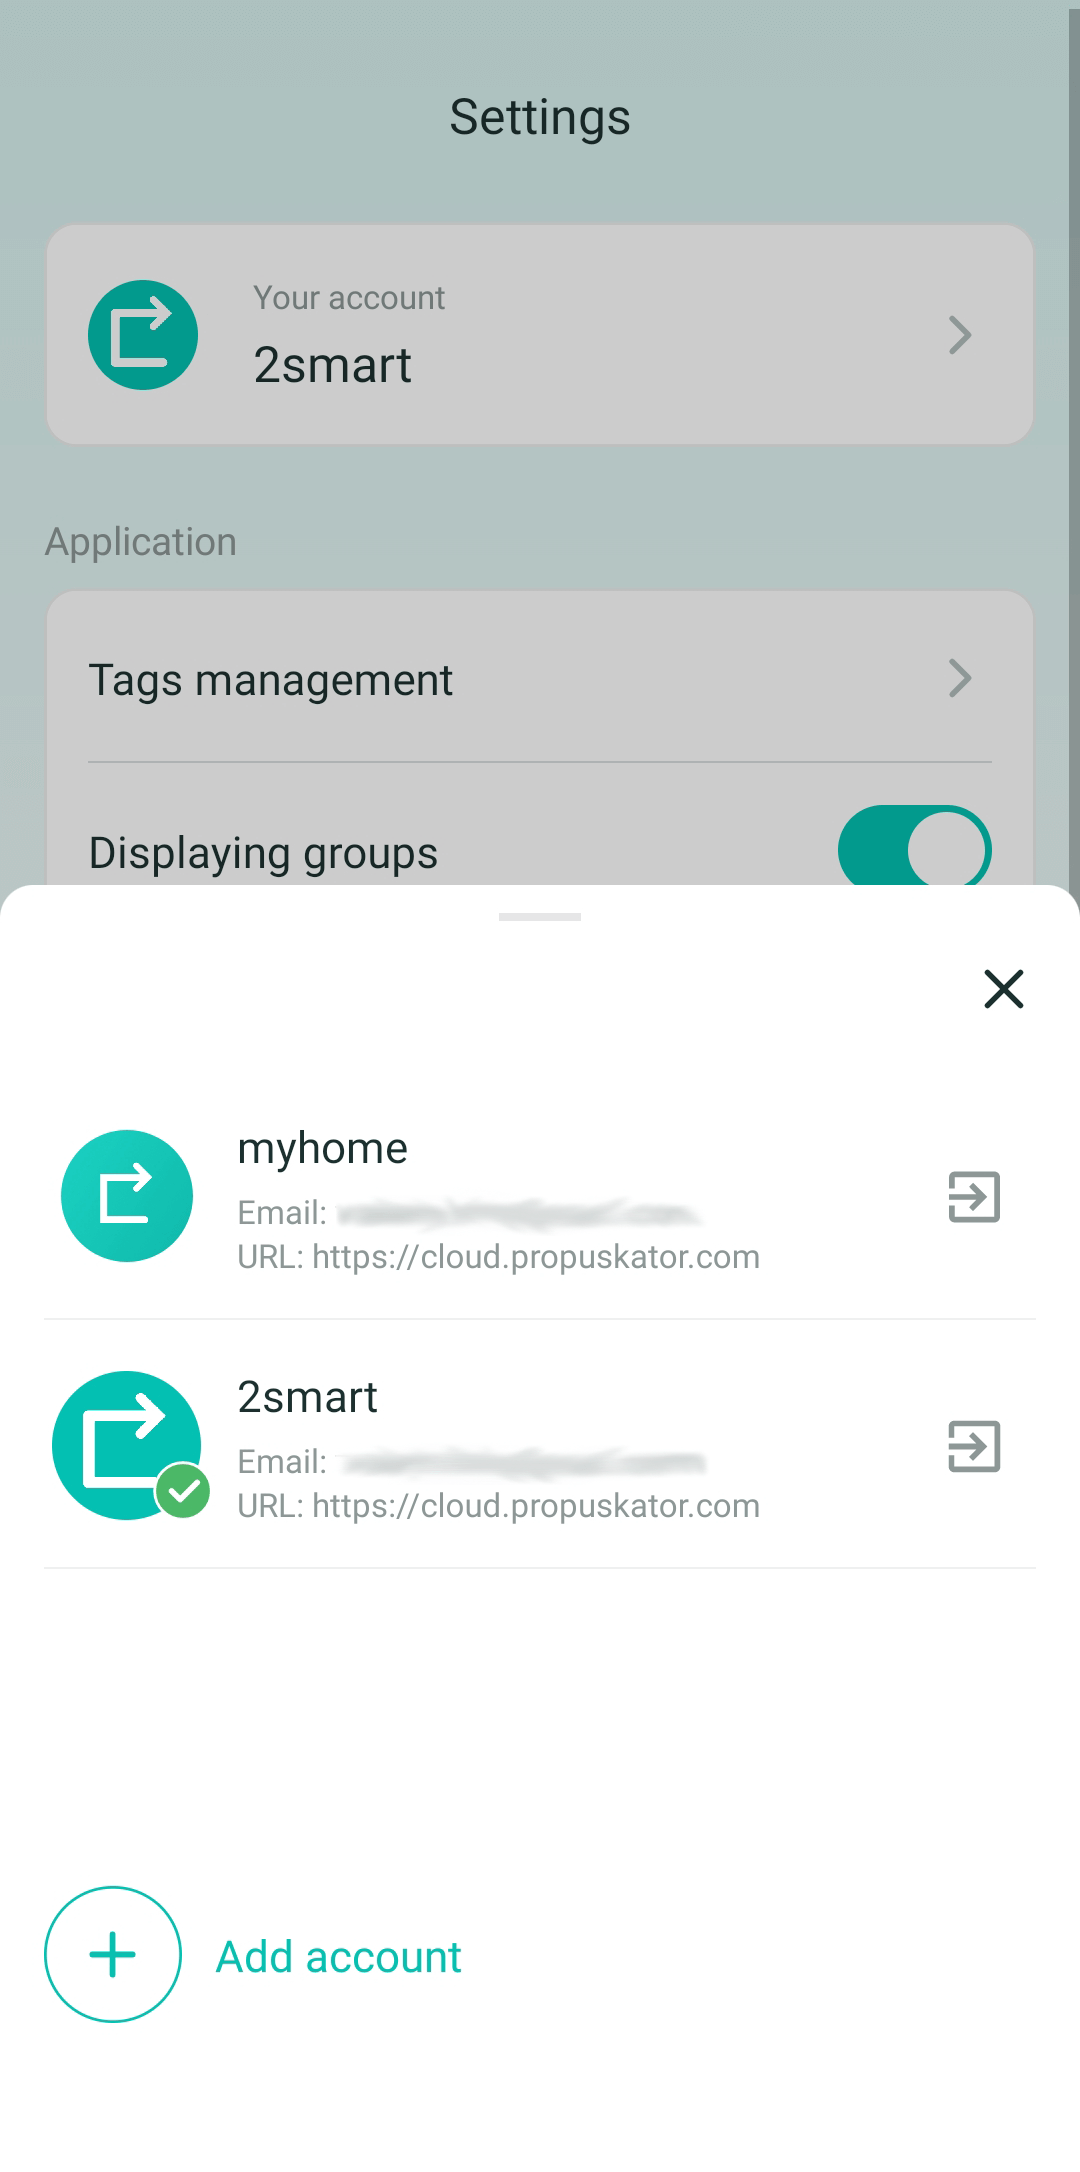 Logging in to multiple ACS Propuskator accounts in one smartphone